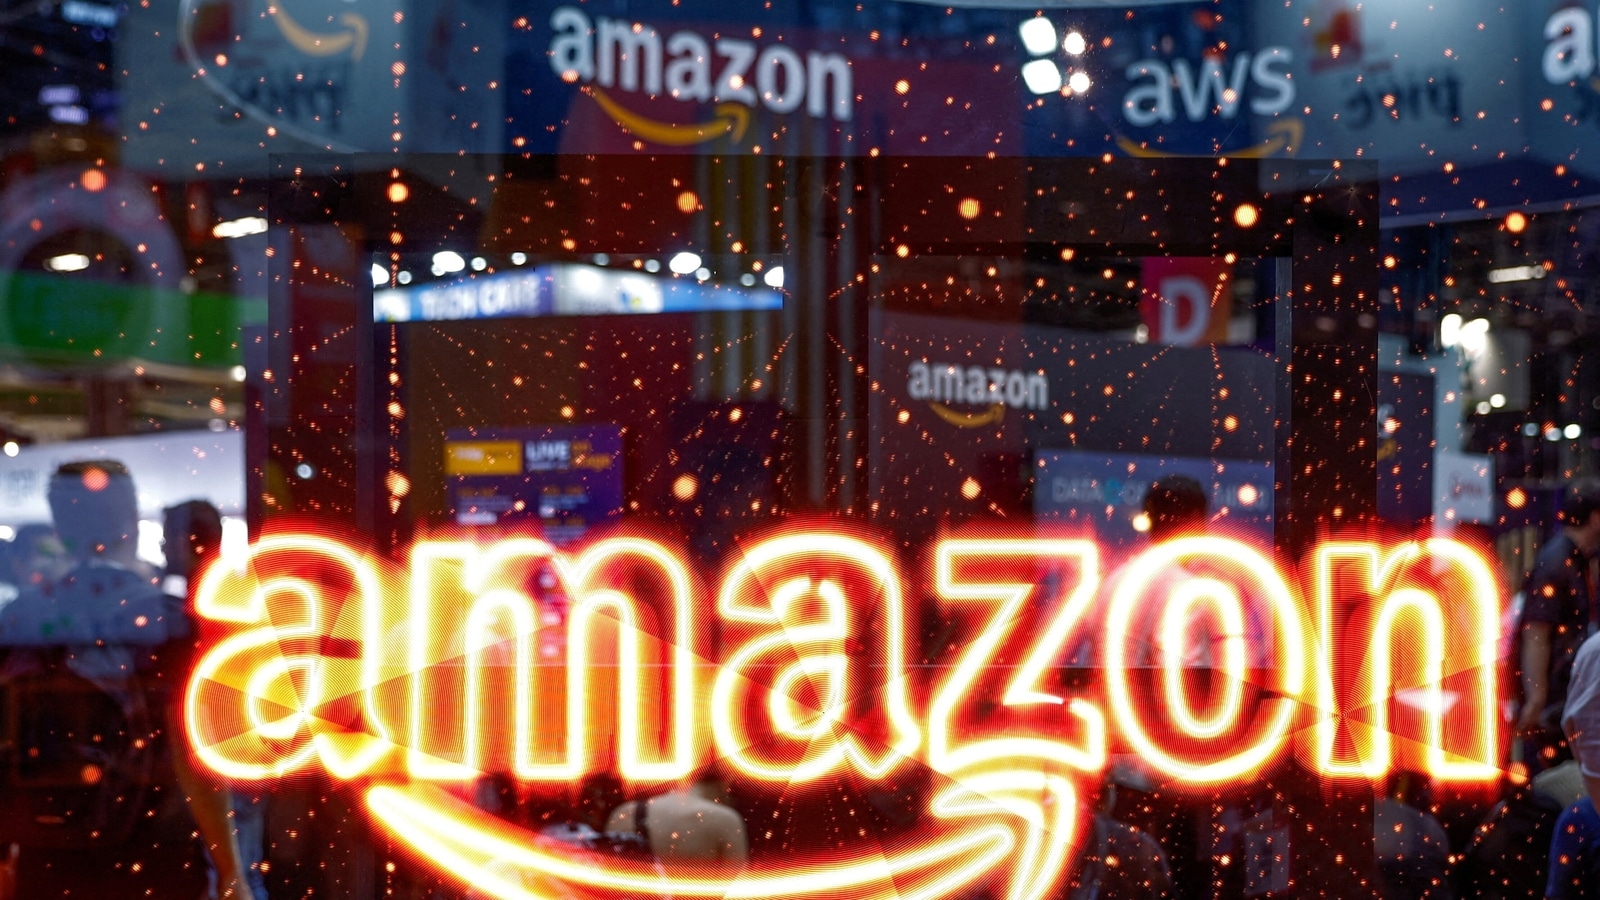 Exclusive-Amazon has drawn thousands to try its AI service competing with  Microsoft, Google | Tech News